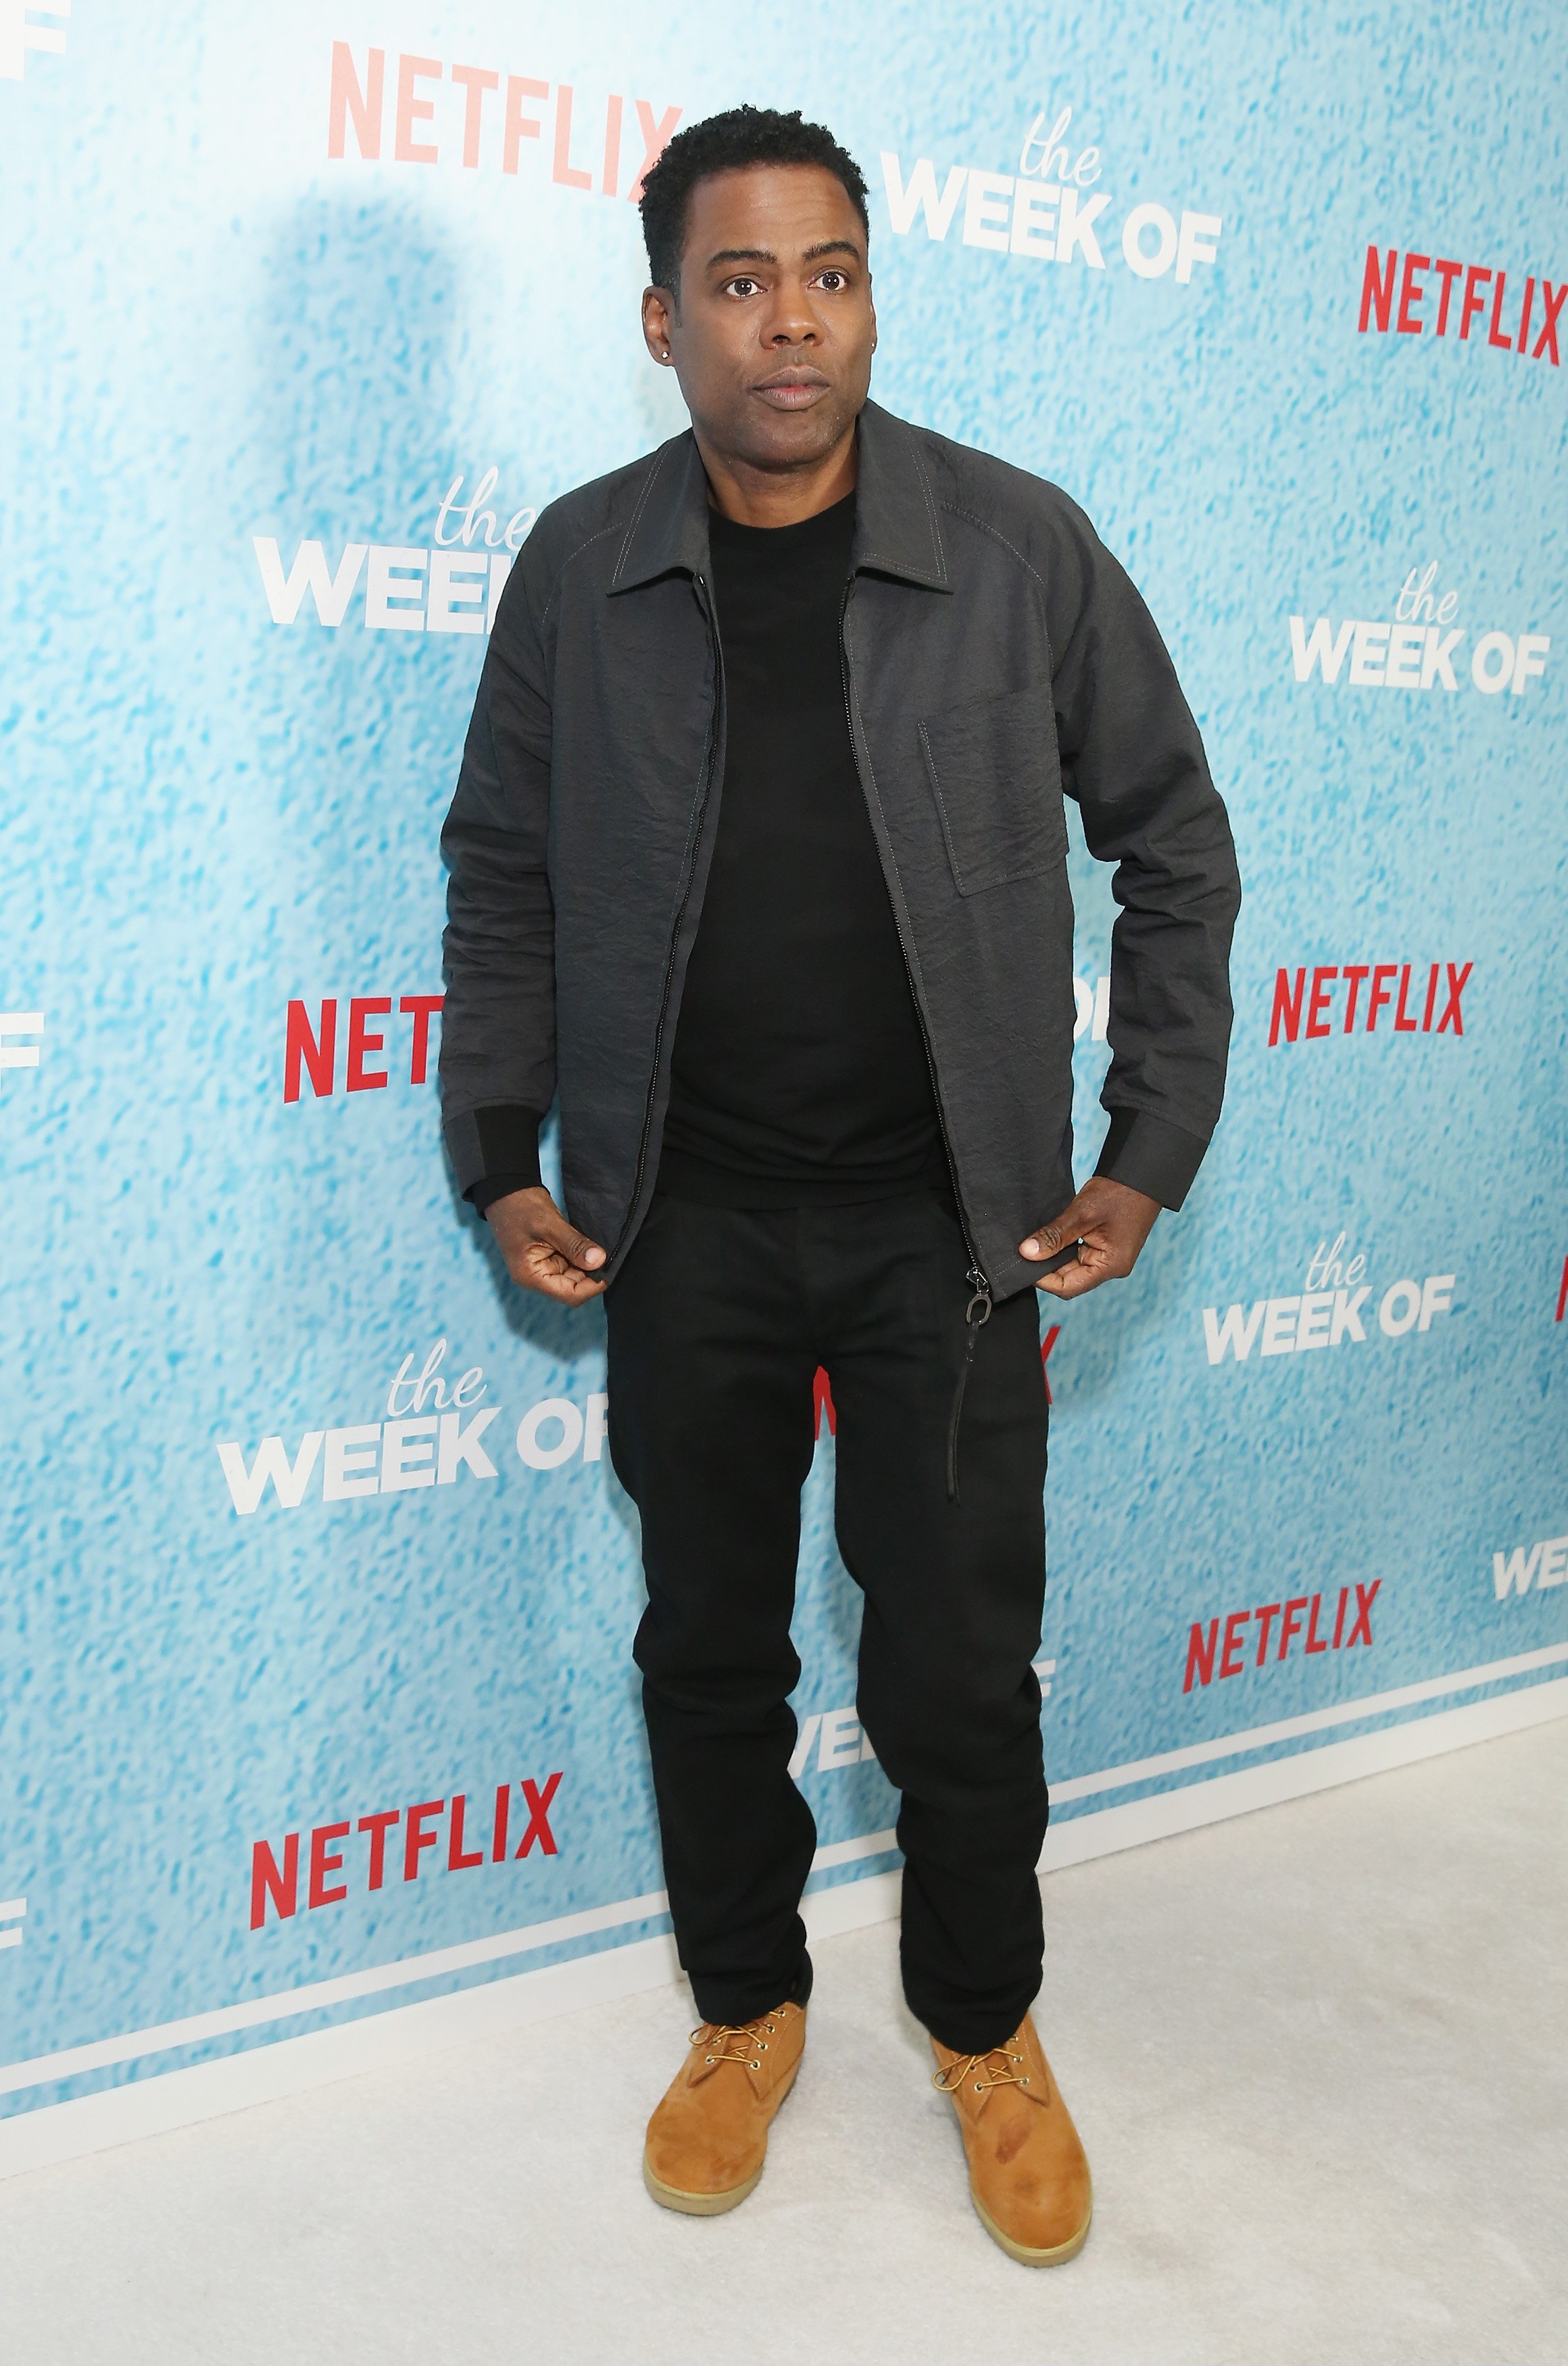 Chris Rock attends the premiere of the Netflix film "The Week Of" in New York City on April 23, 2018 | Photo: Getty Images